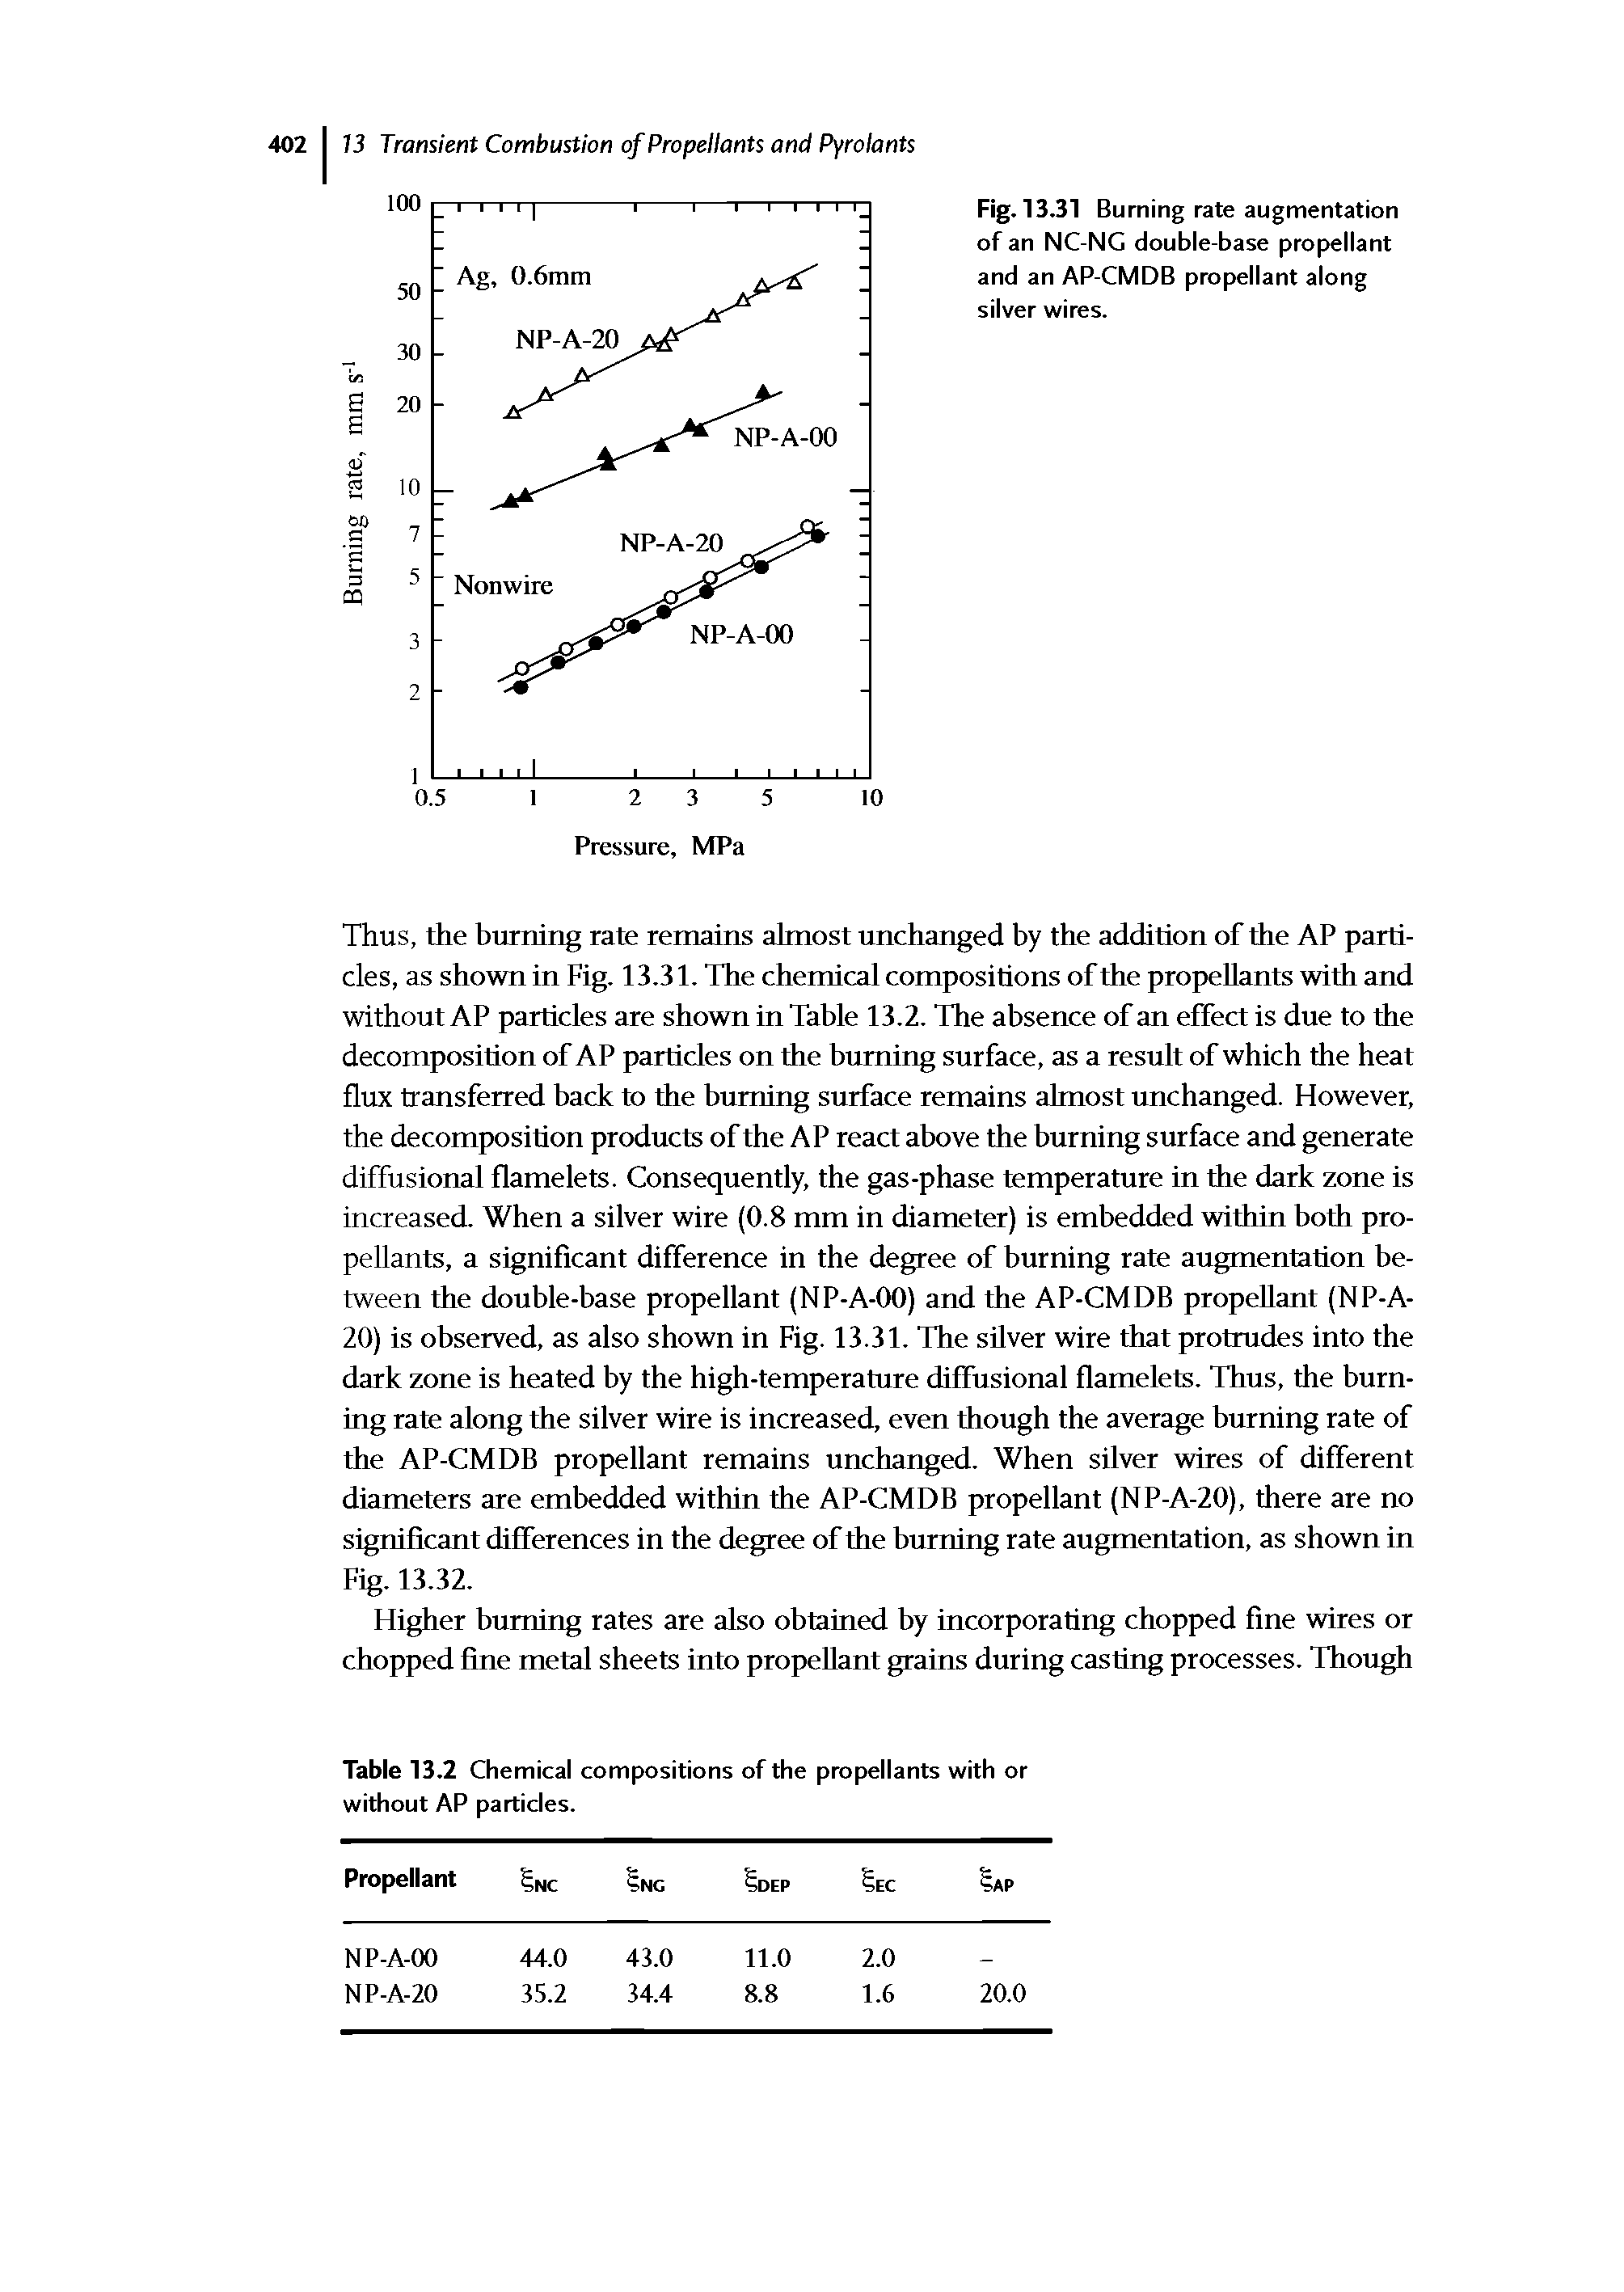 Fig. 13.31 Burning rate augmentation of an NC-NG double-base propellant and an AP-CMDB propellant along silver wires.